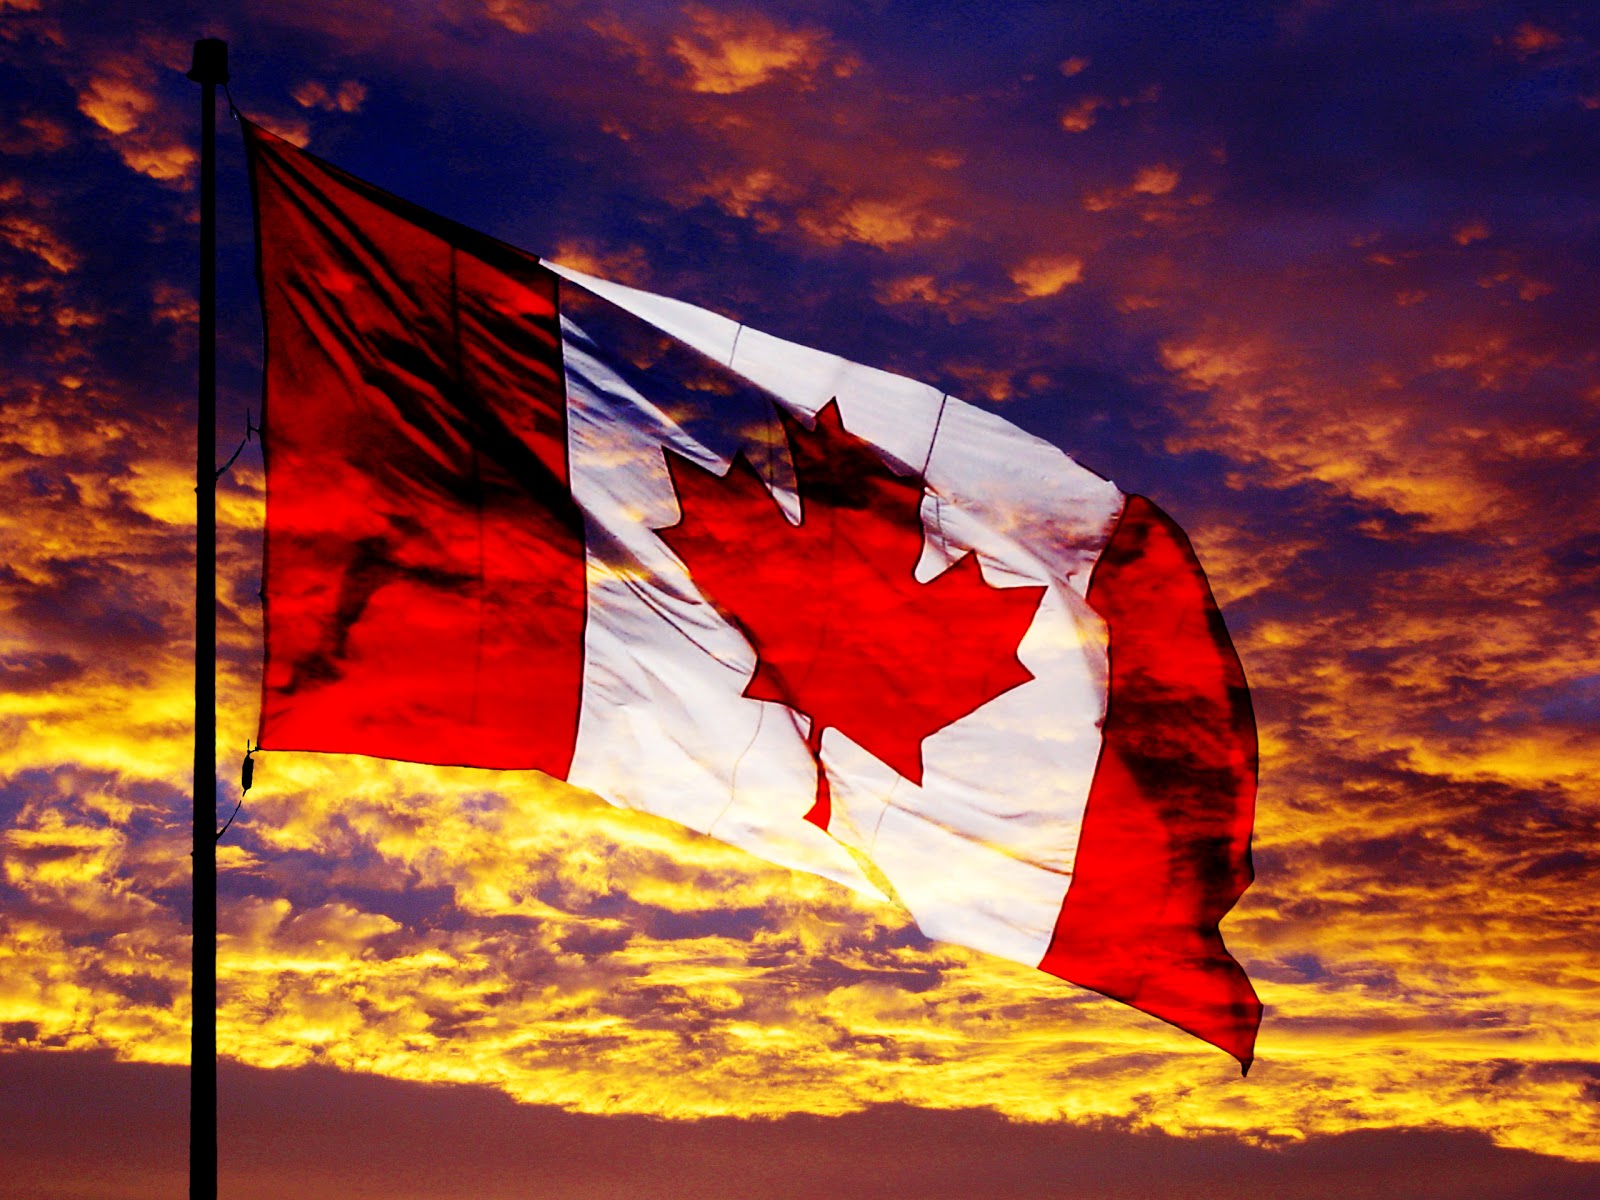  vista and xp wallpapers awesome canada flag designs hd wallpapers